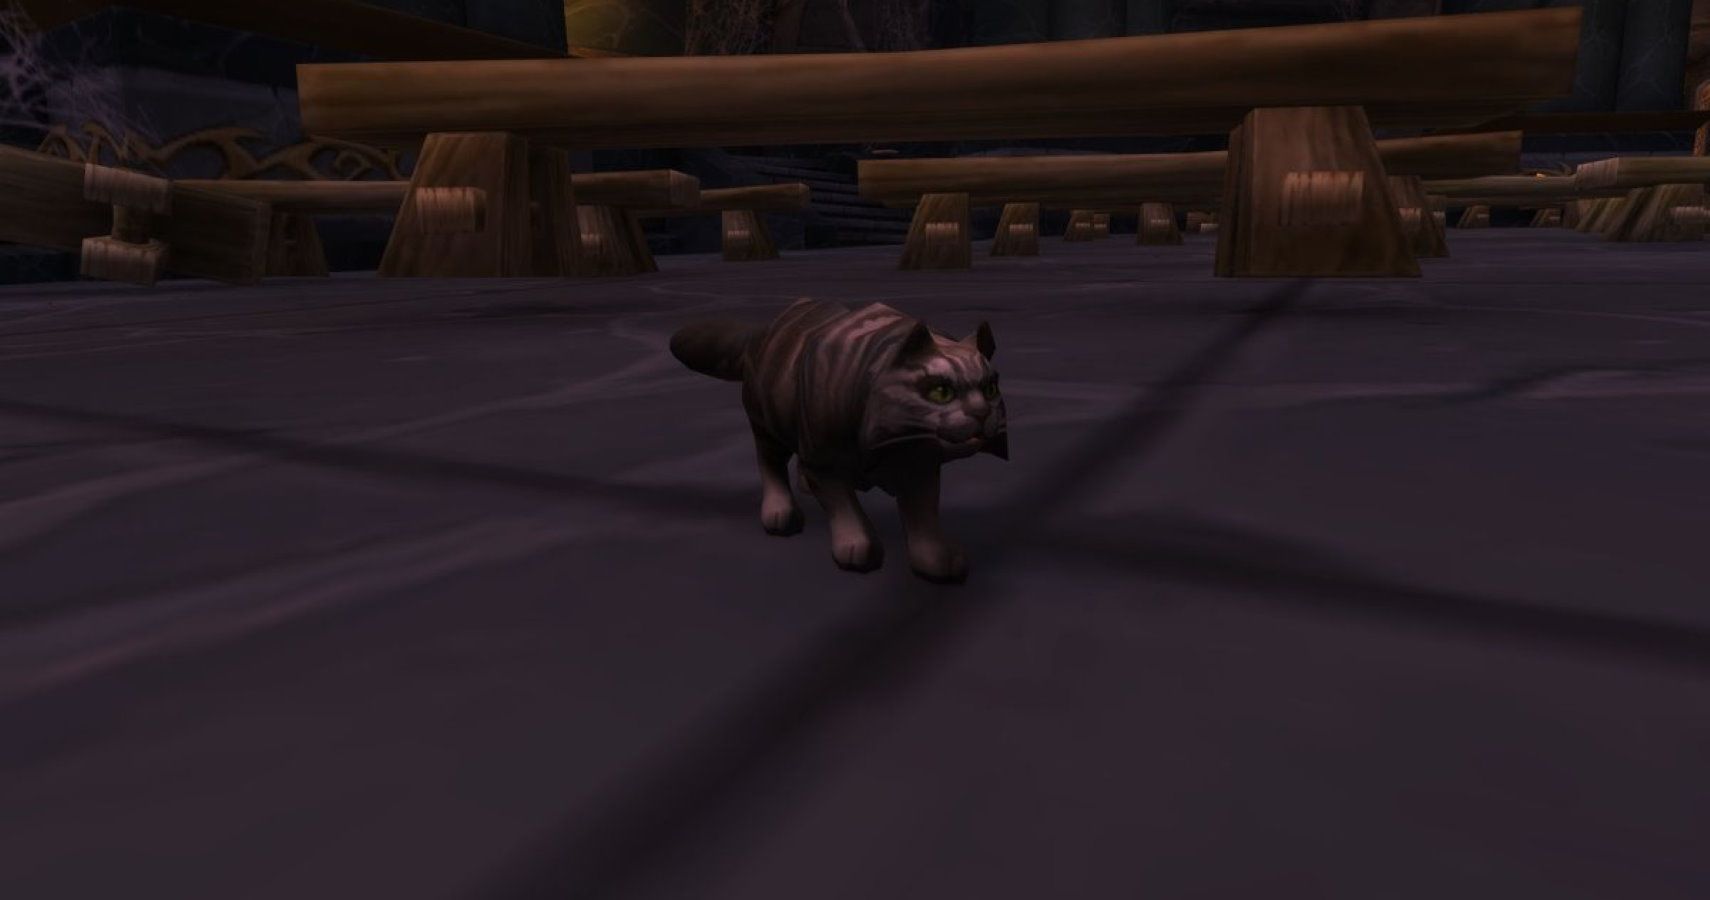 World Of Warcraft Players Find Jenafur The Mysterious Void Cat